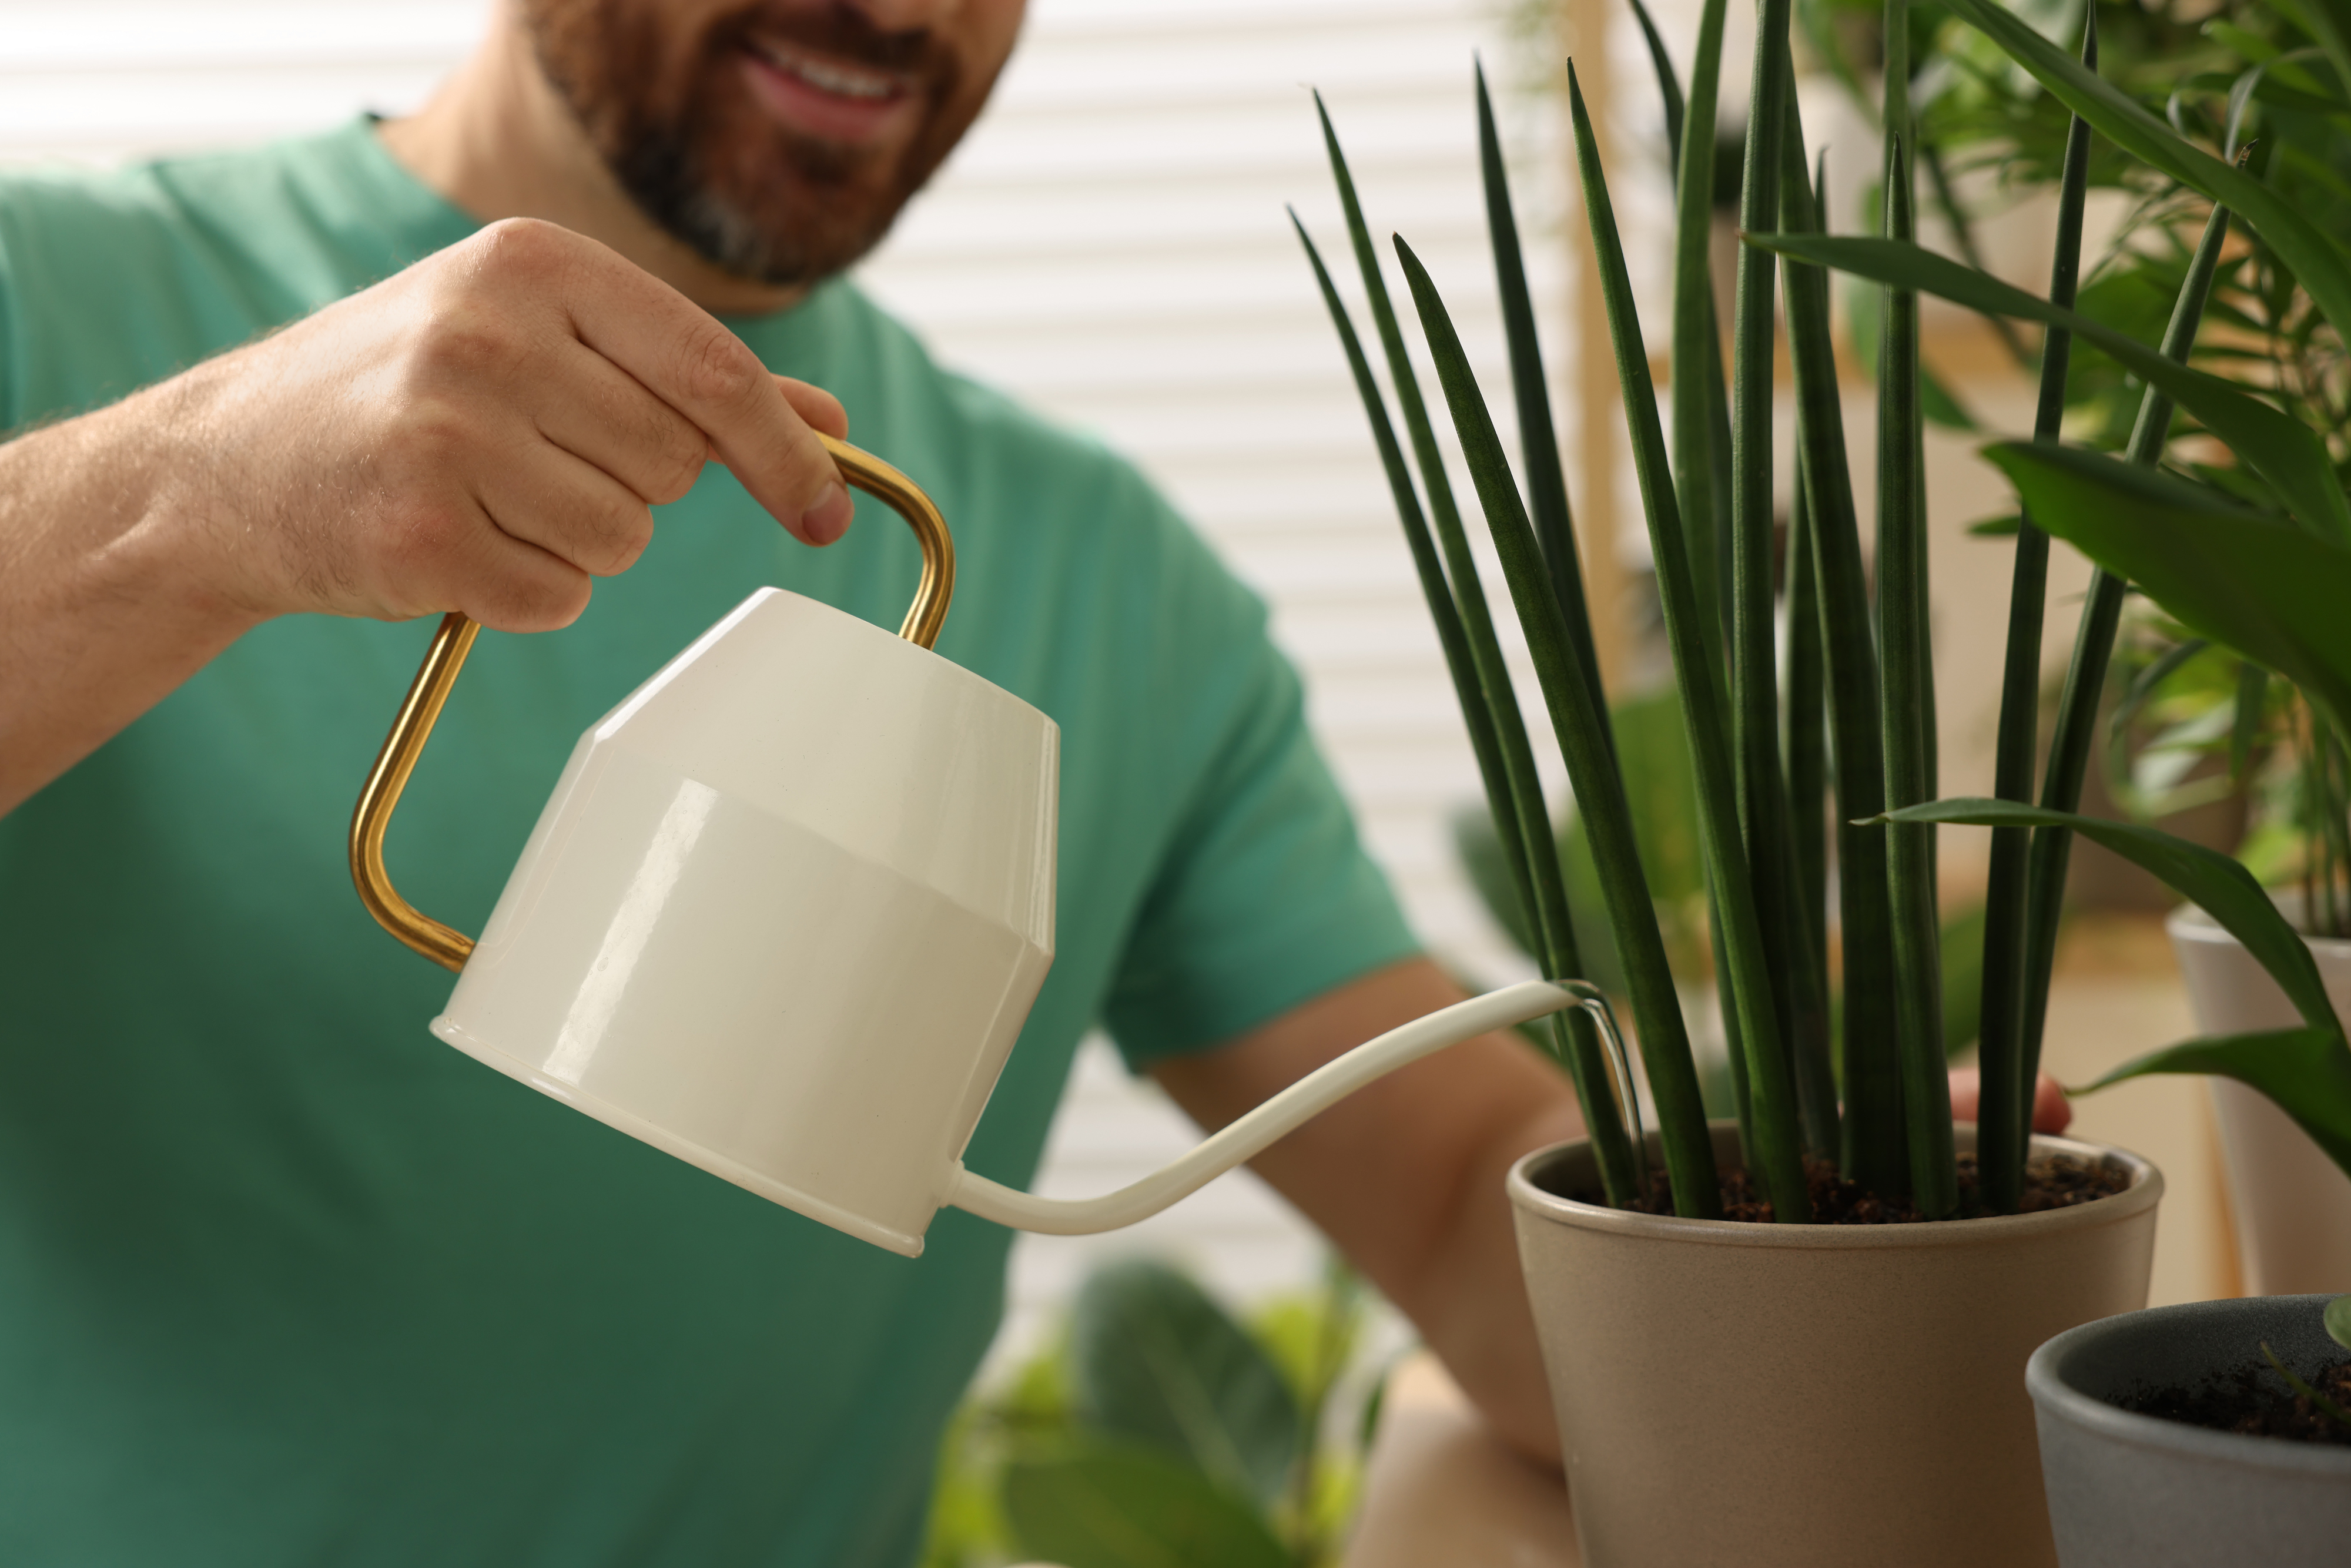 Person watering houseplant, smiling, focus on watering can and plant